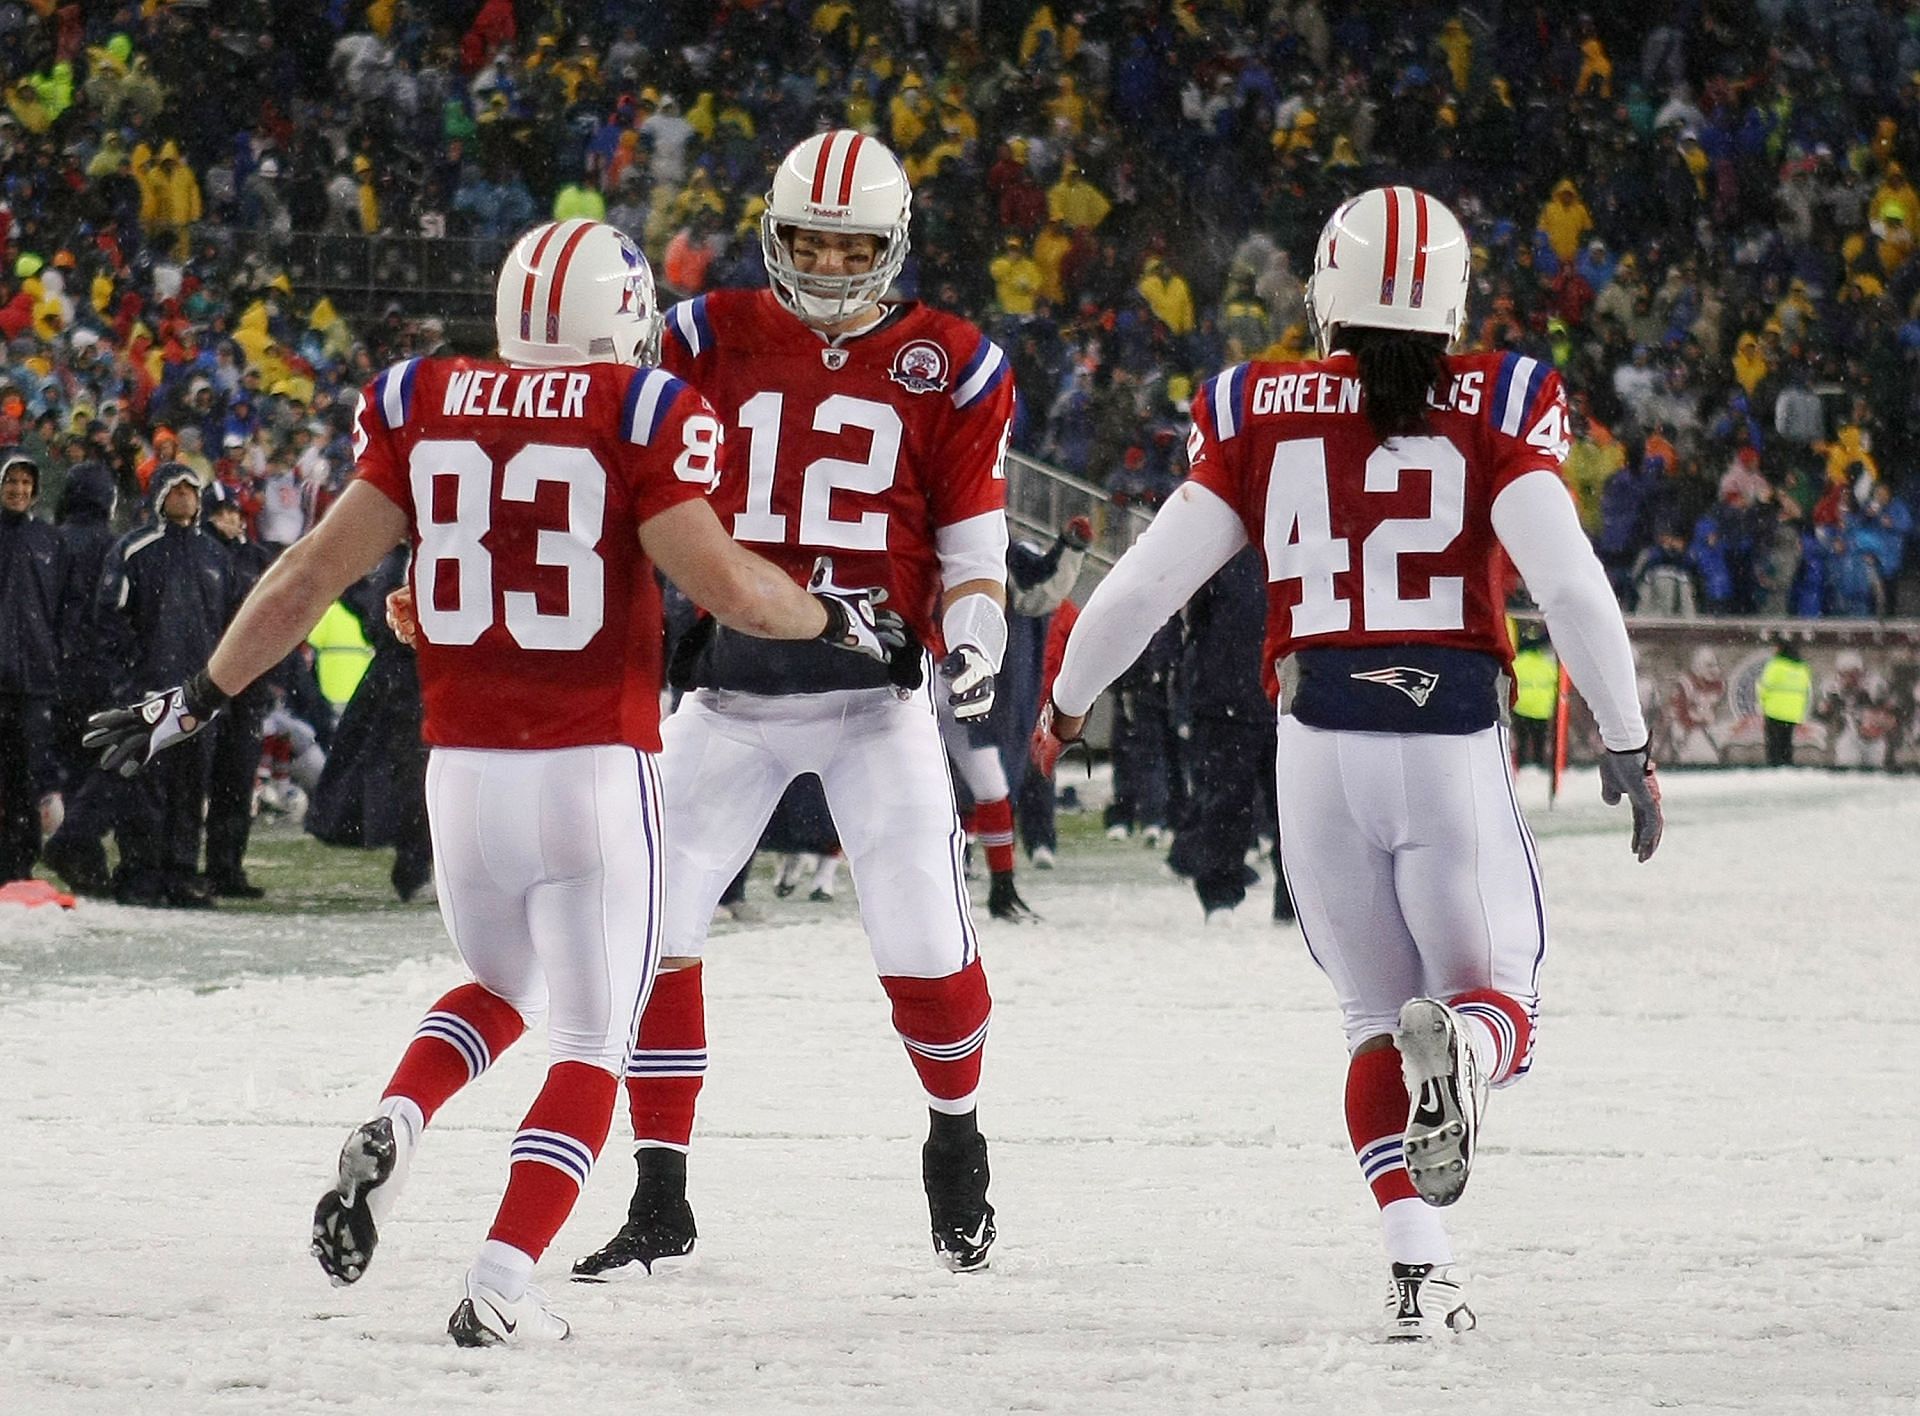 Ahead of Titans' TNF matchup vs. Packers, remembering when Tom Brady routed Tennessee in massive 59-point win during blizzard